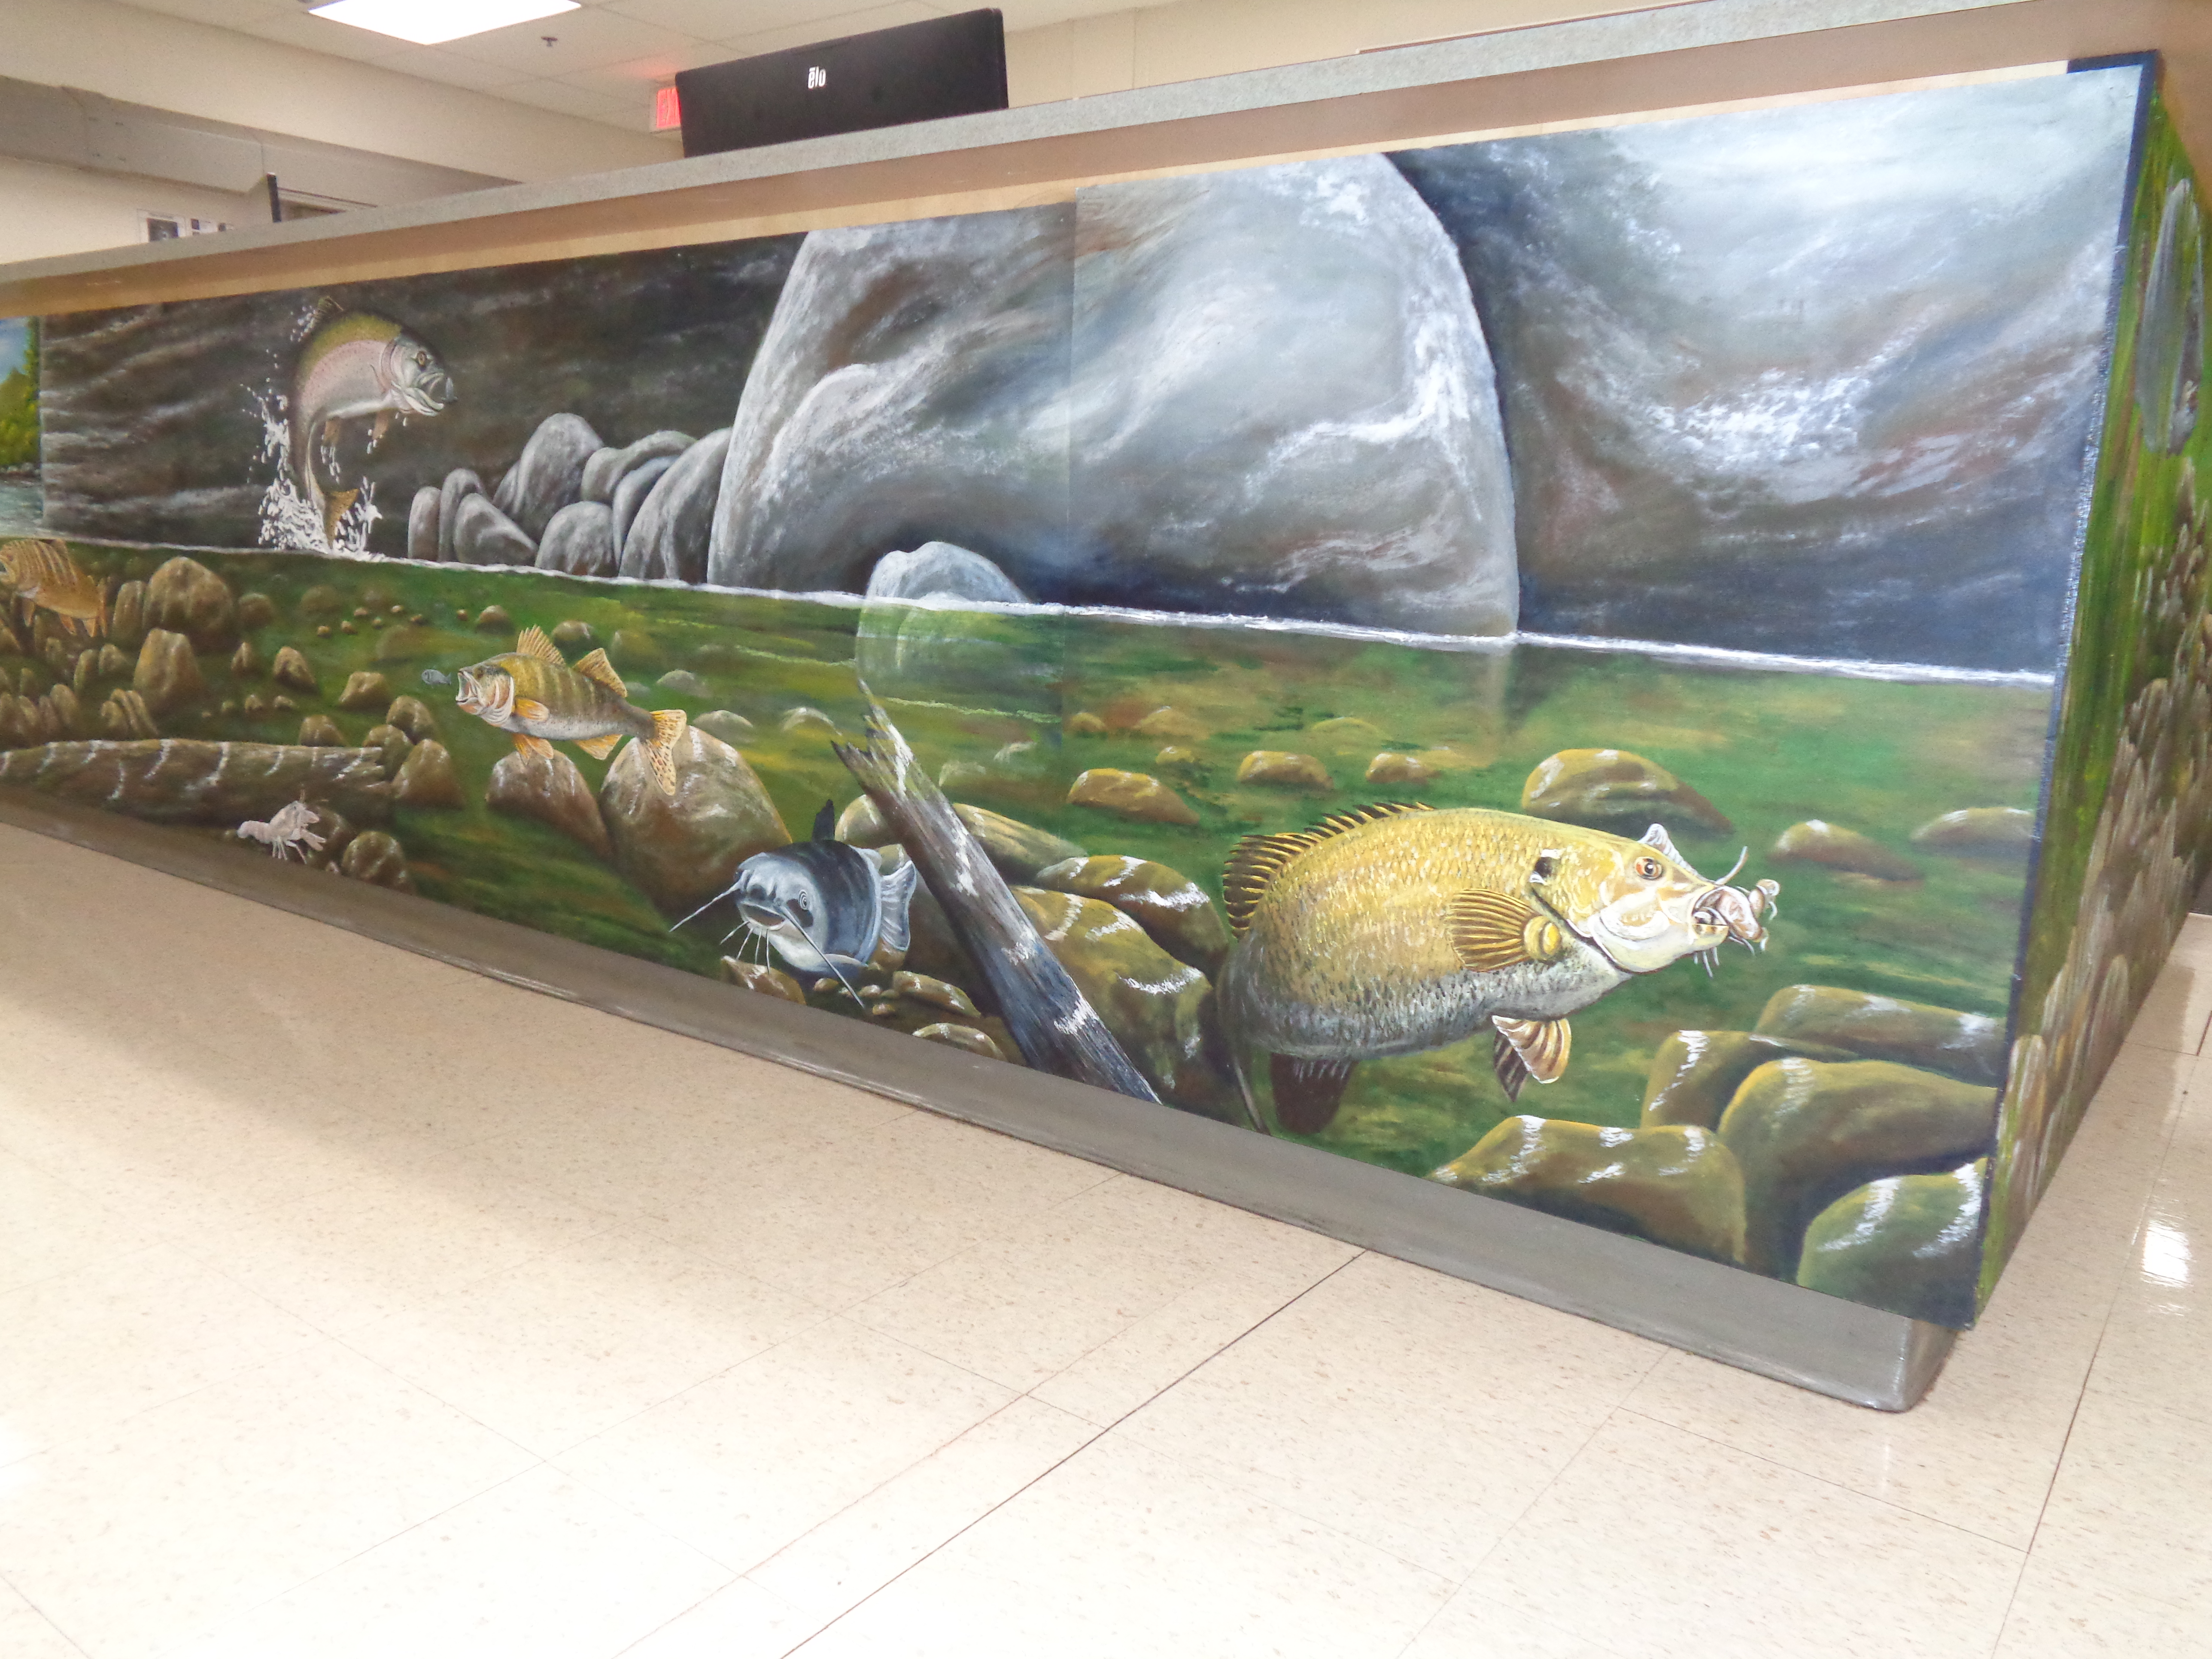 A mural showing a forest river scene